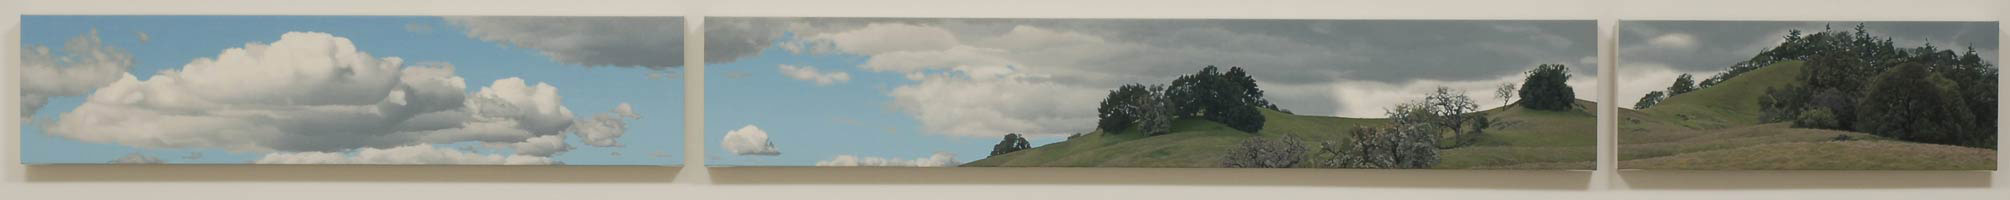 Ridge in Winter, 2005 - 06 / 
        oil on polyester (triptych) / 
        Total size: 9 x 117 in. (22.9 x 297.2 cm)  / 
        Private collection 